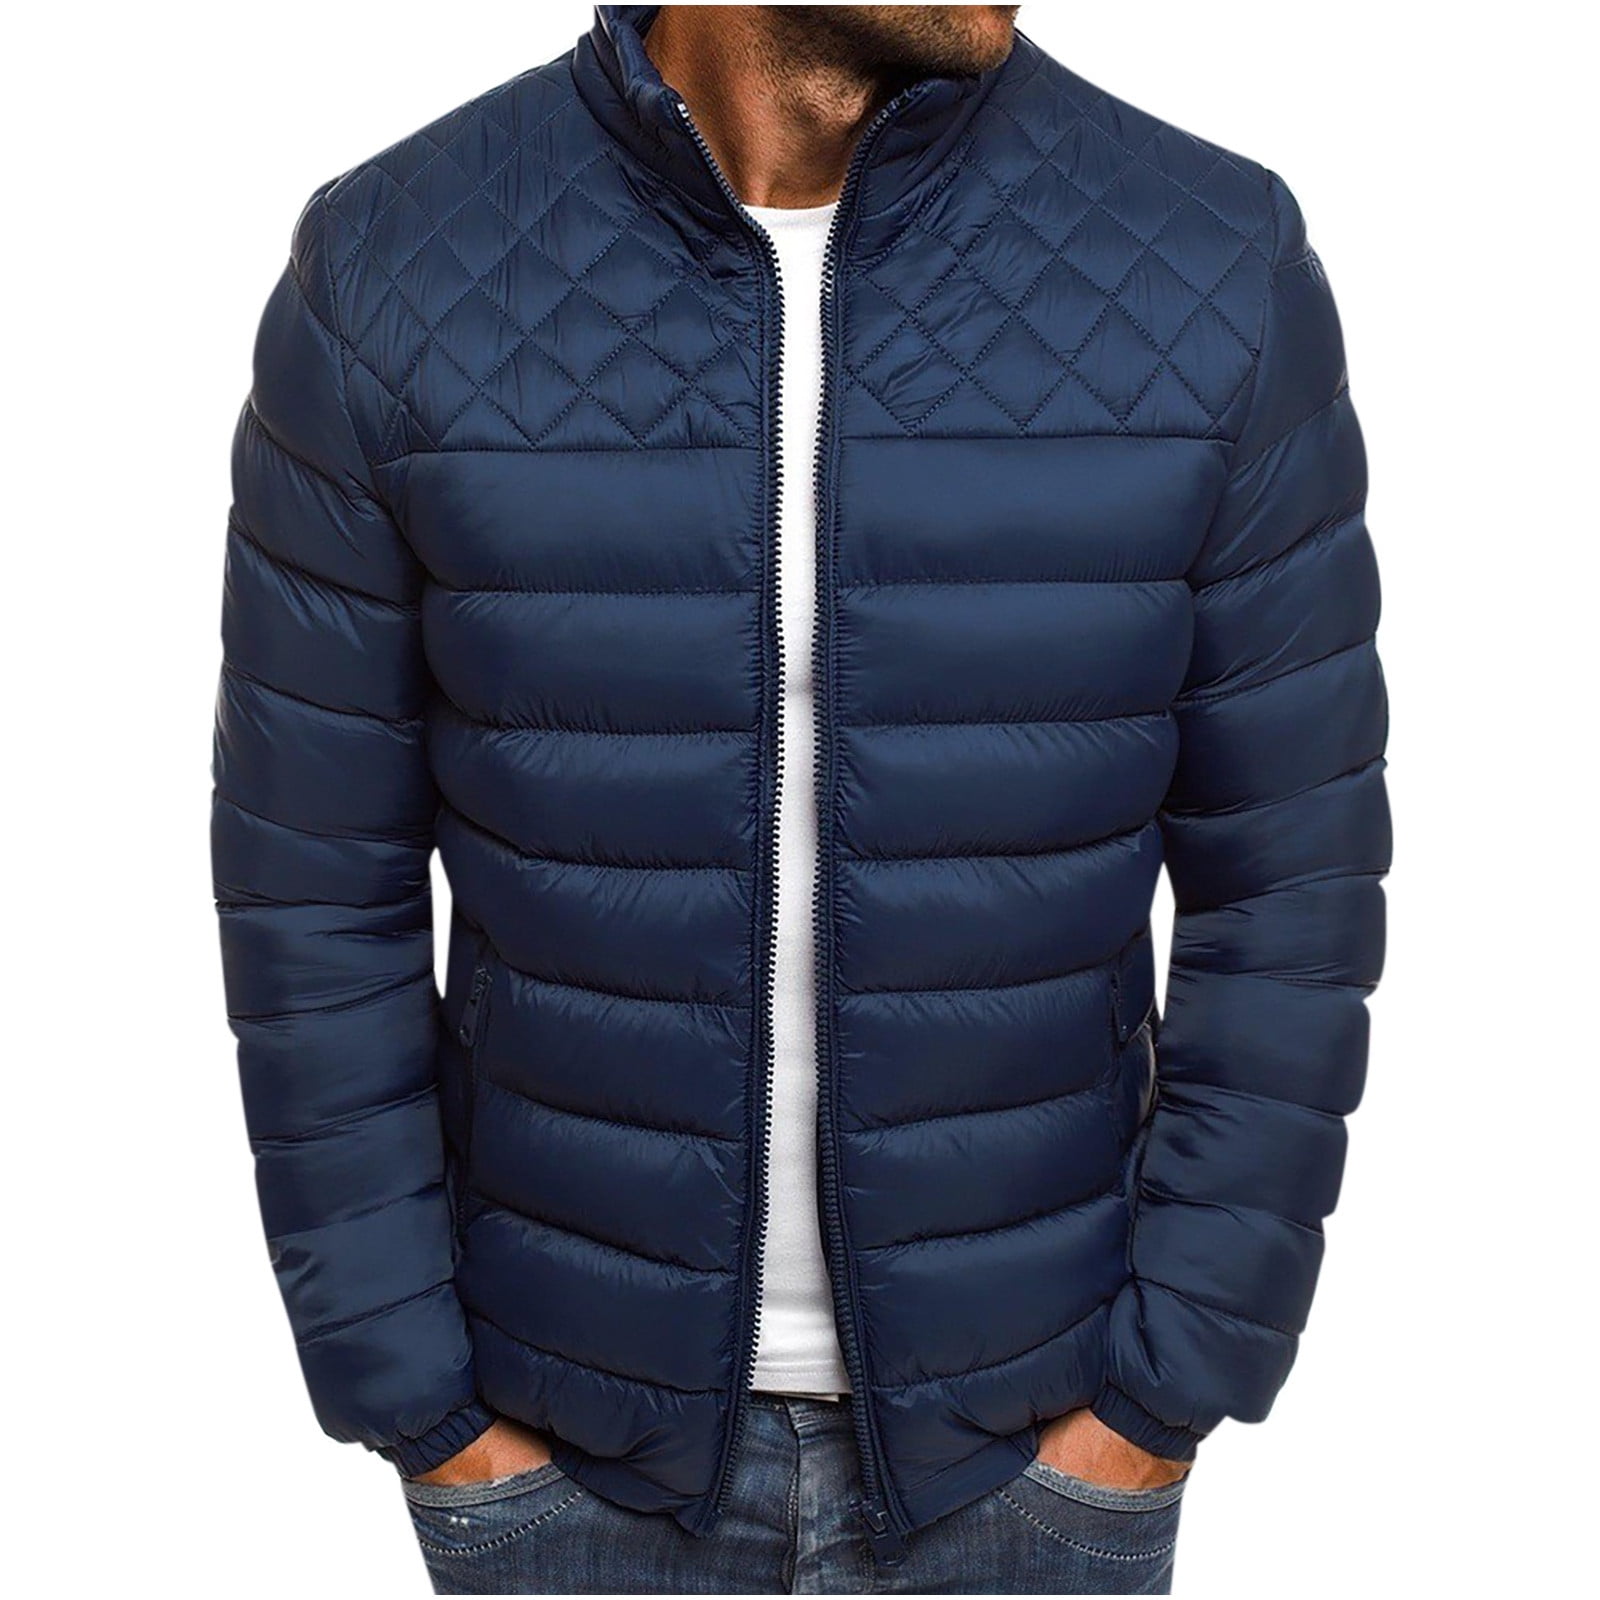 Stamzod Winter Jacket Clearance Men Thin And Light Comfortable Windproof  Stand-up Collar Warm Jackets Men Parkas Slim Quality Brand Men's Coat Navy L